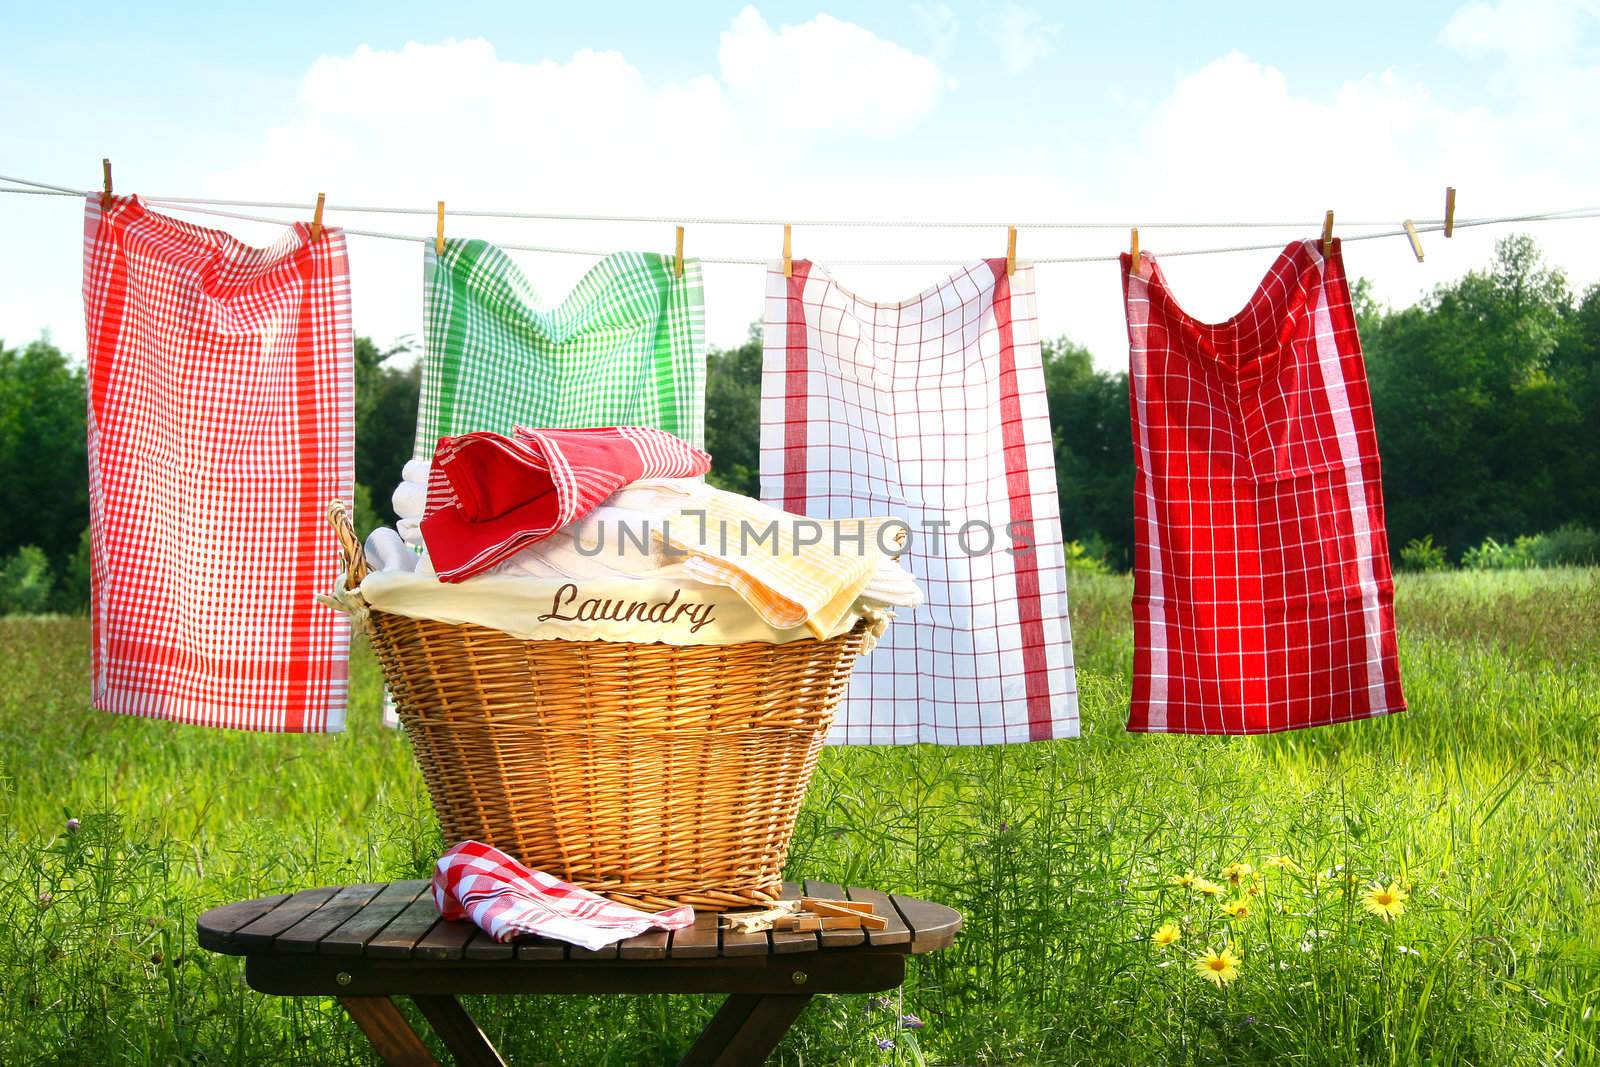 Towels drying on the clothesline with laundry basket